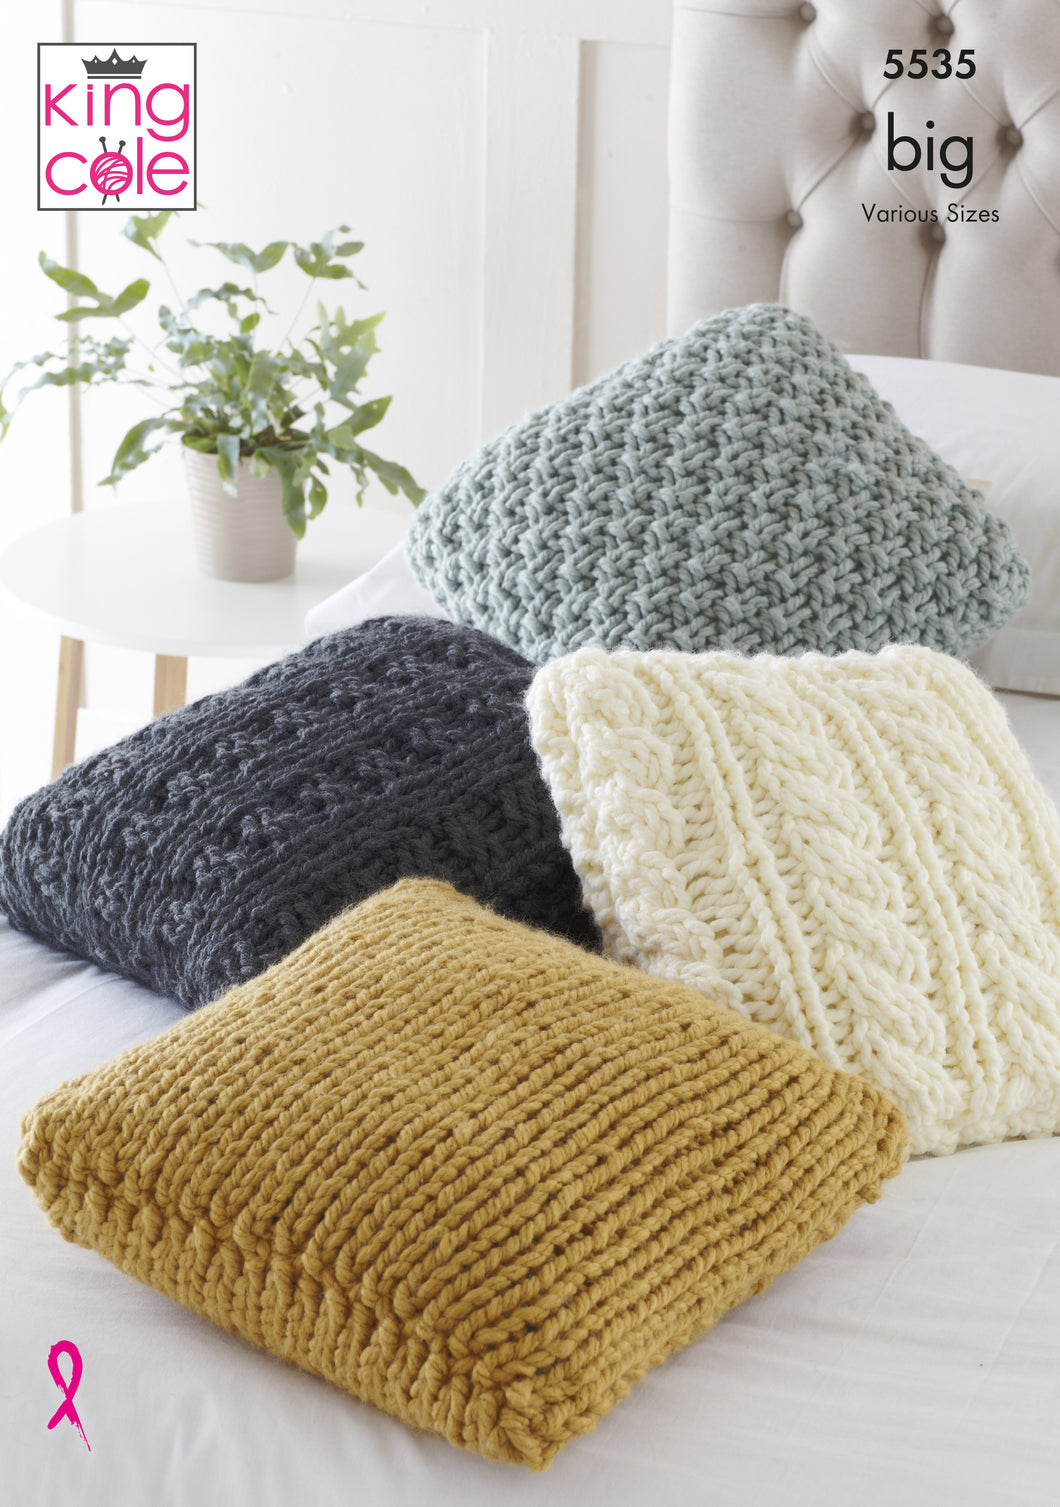 Cushions Knitted in Big Value BIG 5535